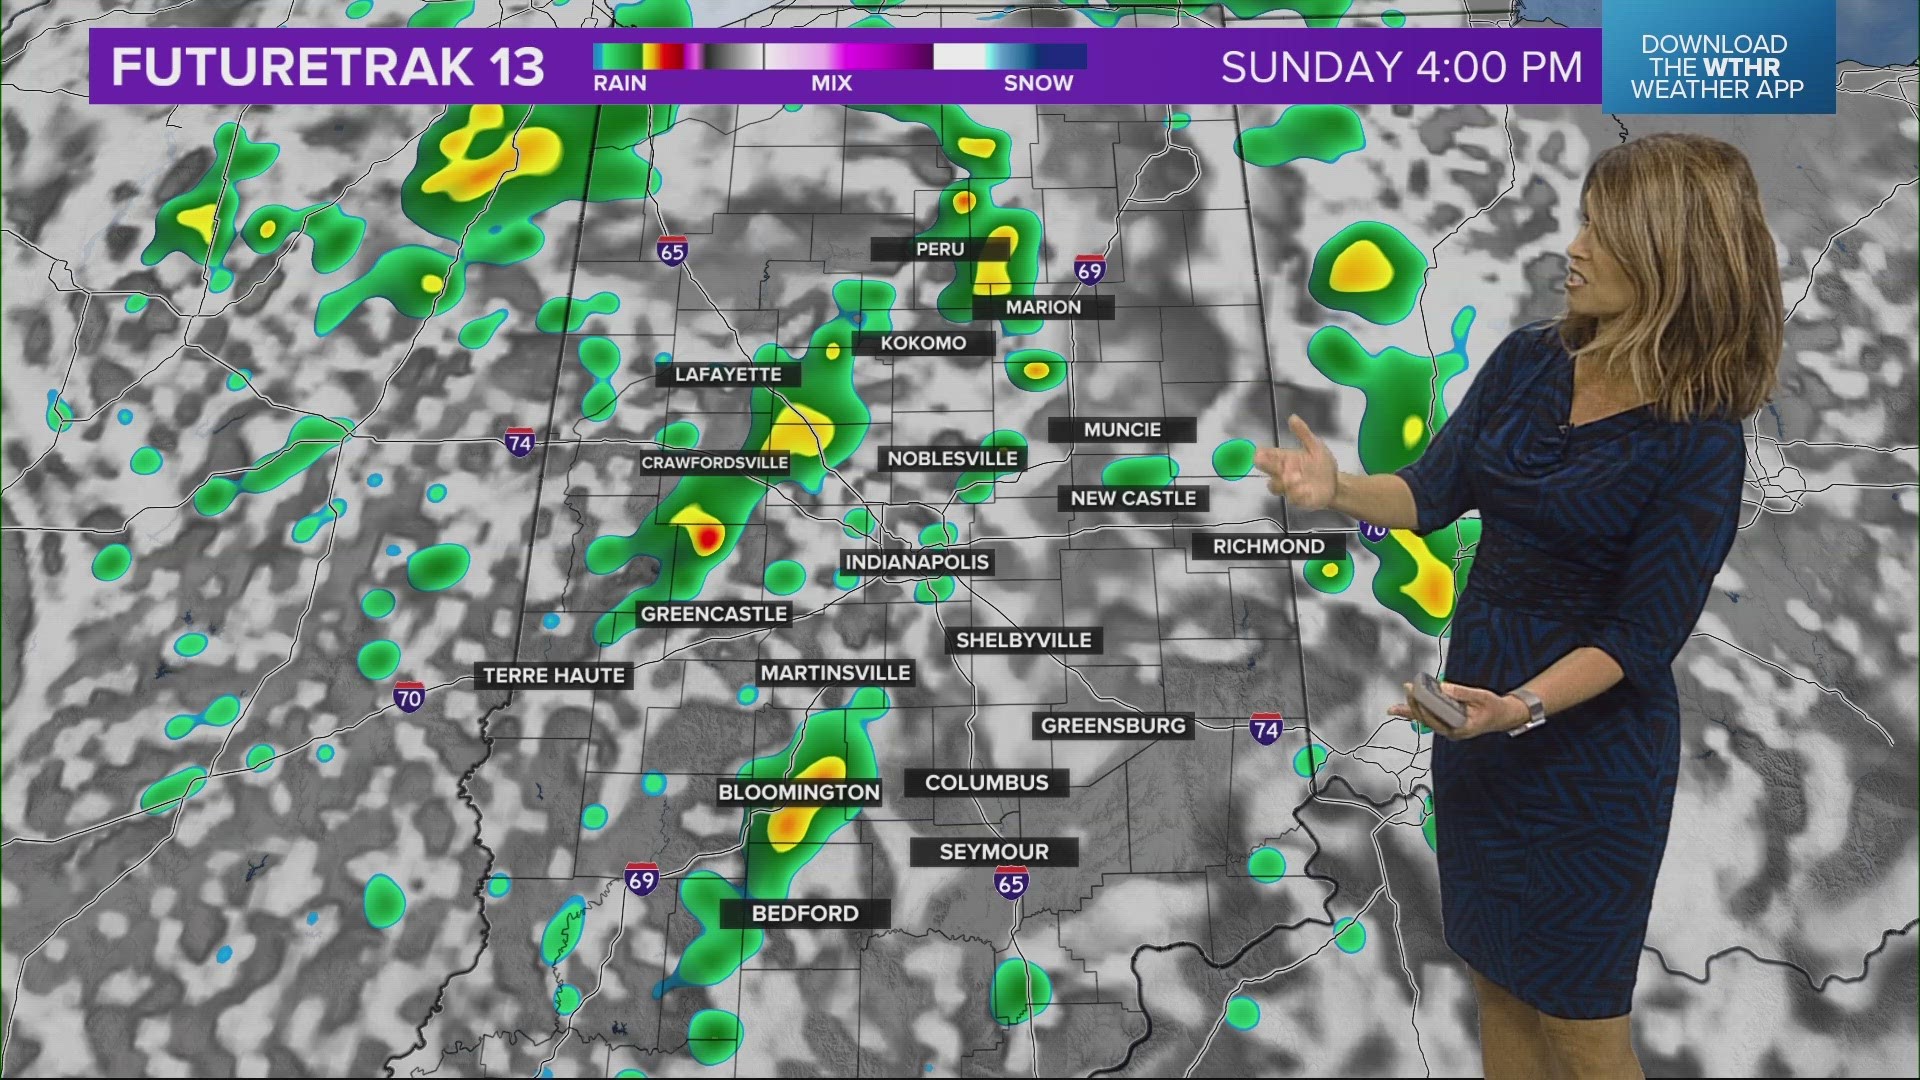 13News meteorologist Angela Buchman takes a look ahead to the weekend forecast.